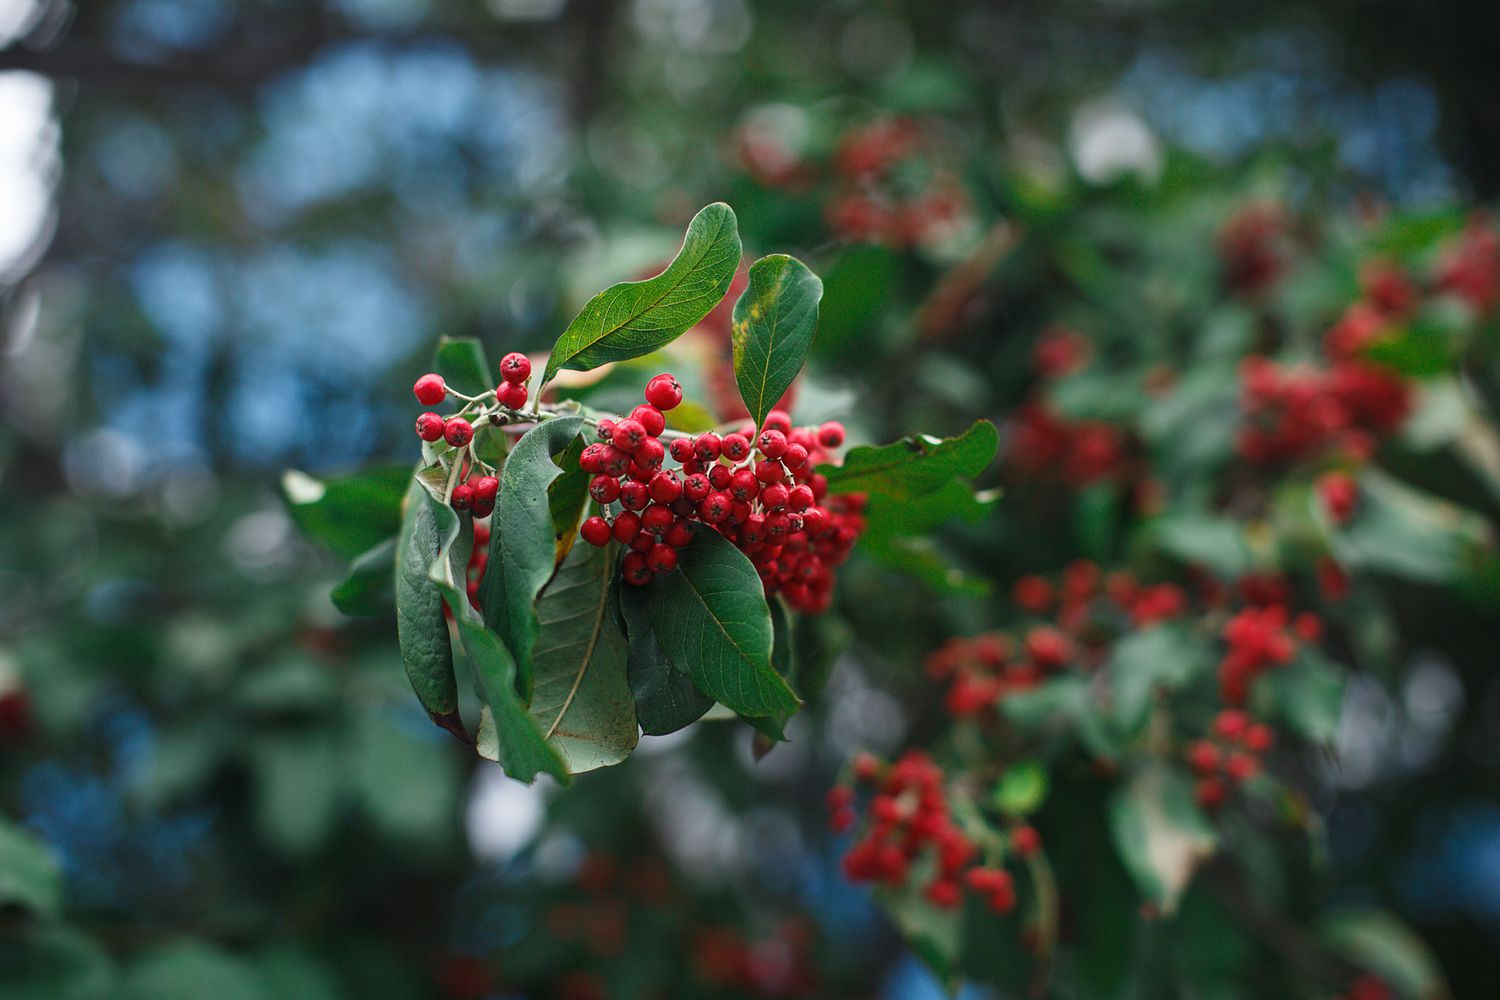 A branch of red winterberry holly tree